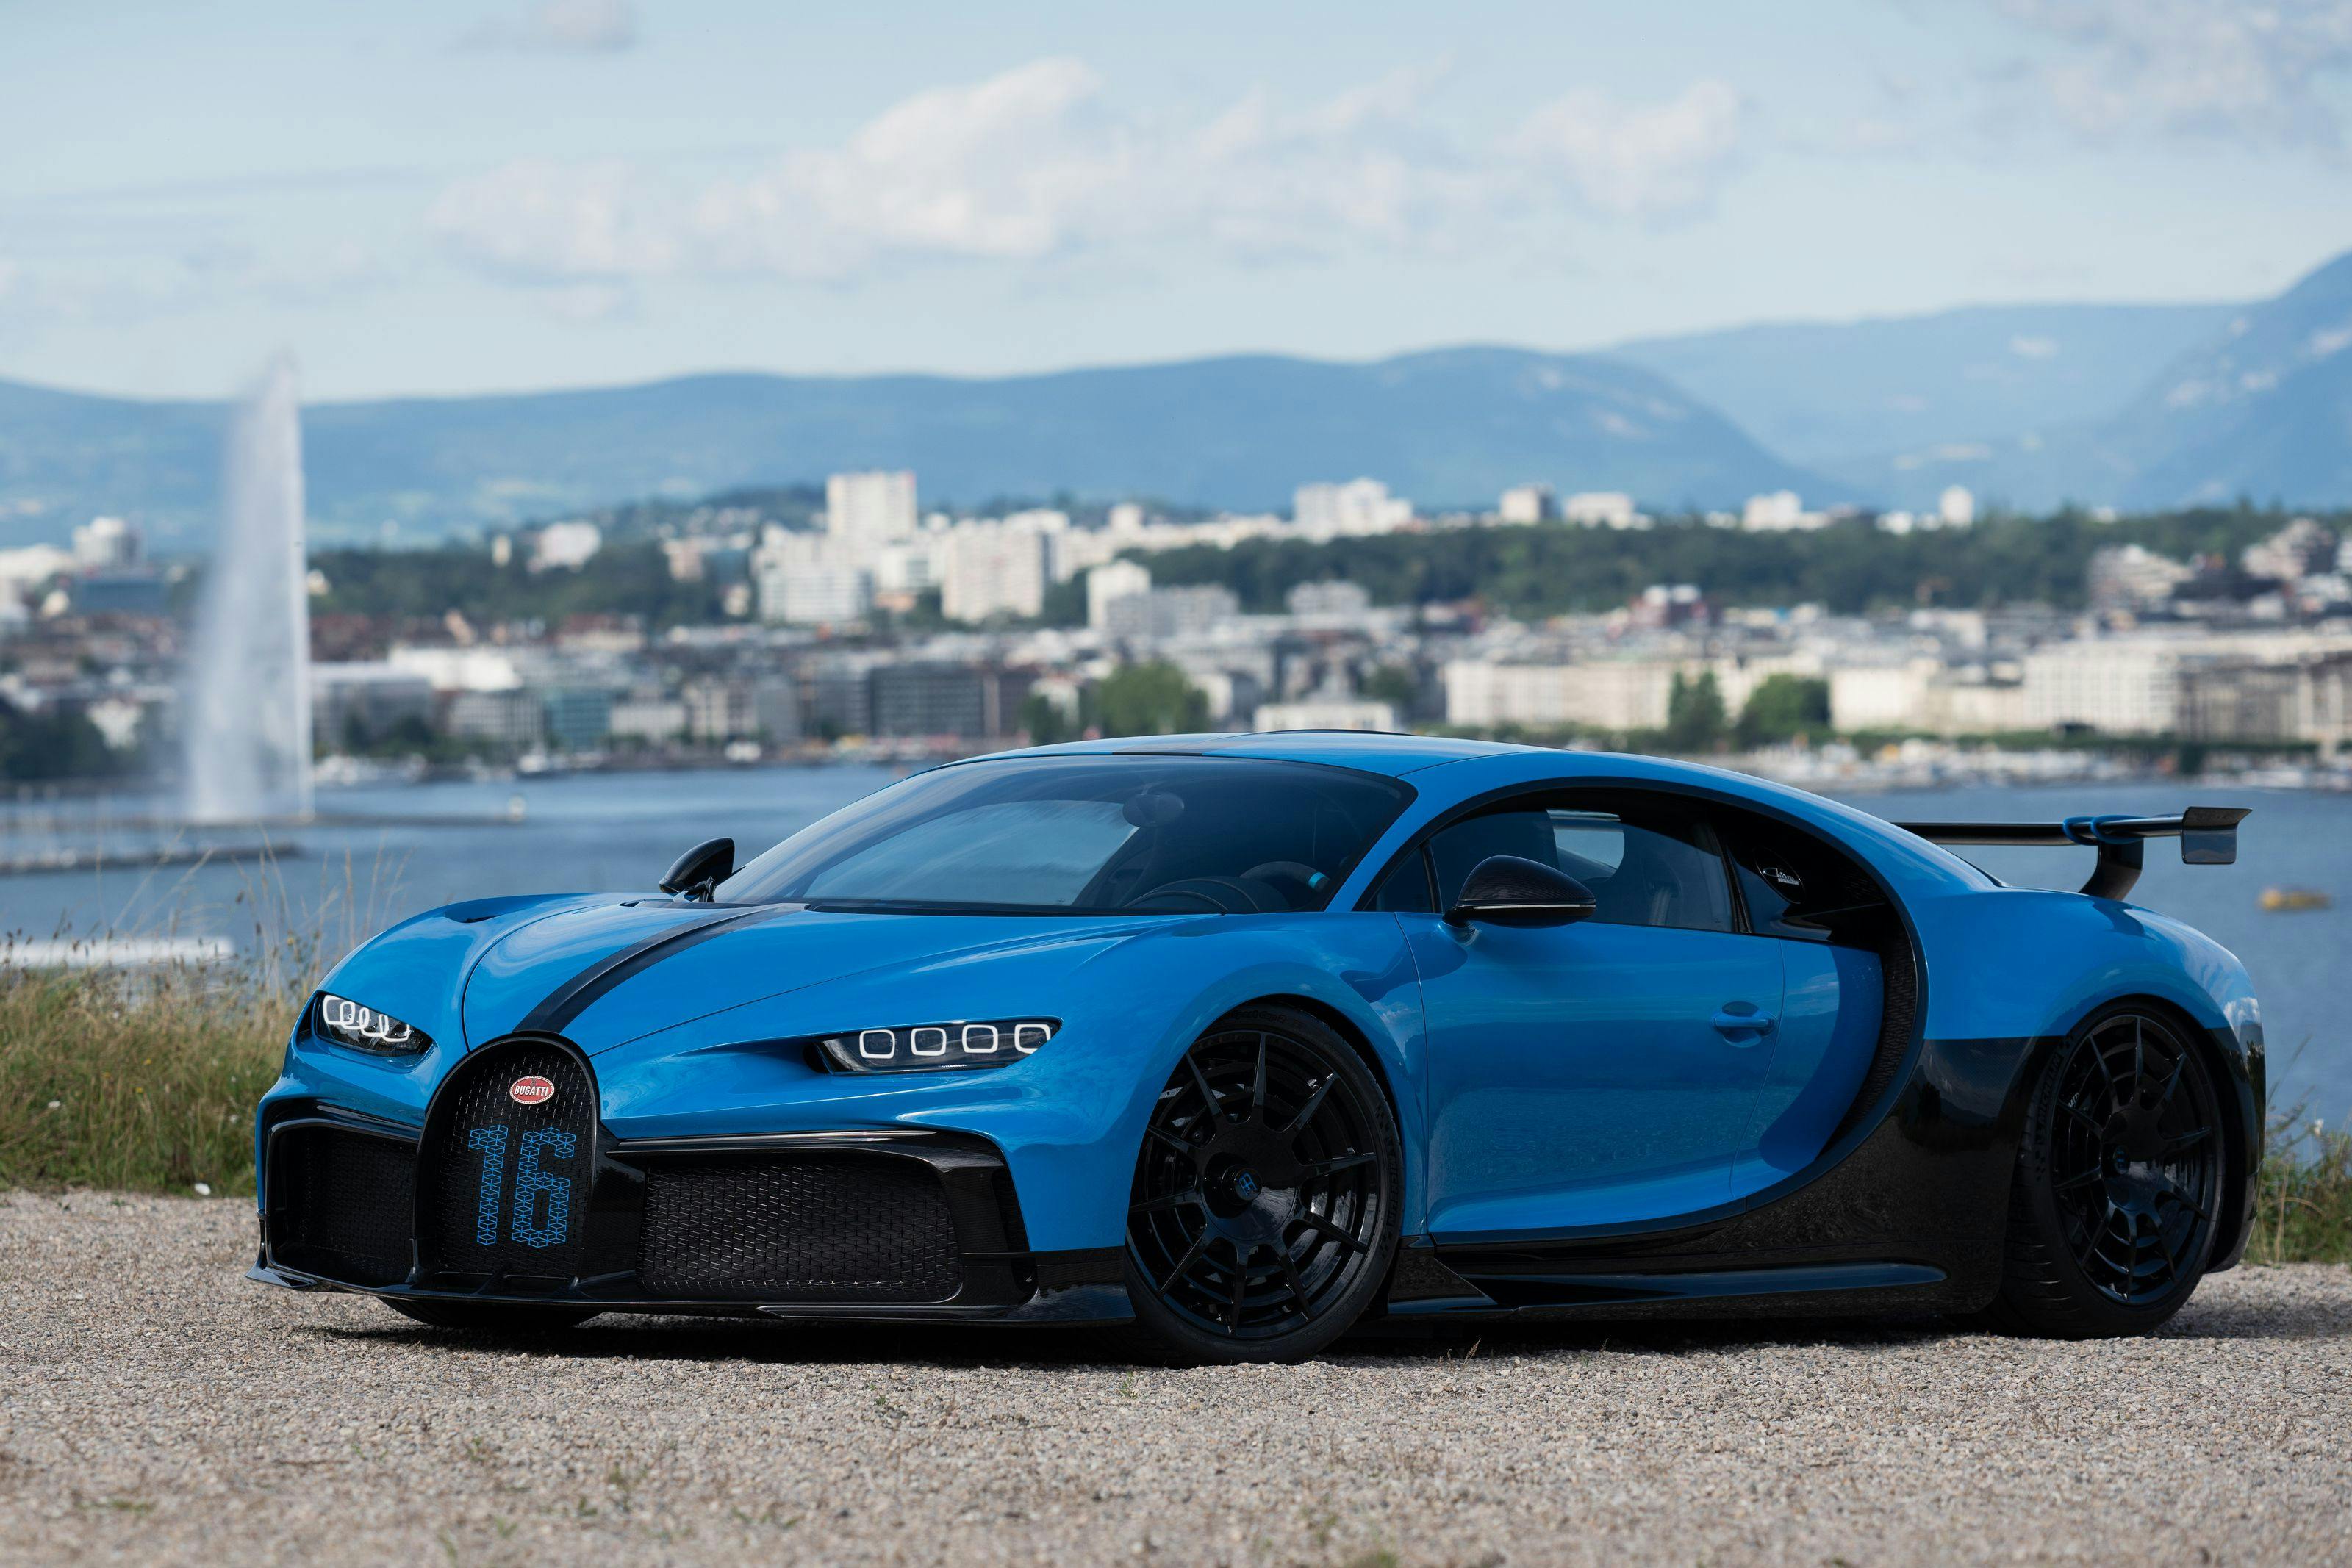 Better late than never: The Bugatti Chiron Pur Sport arrived in Geneva